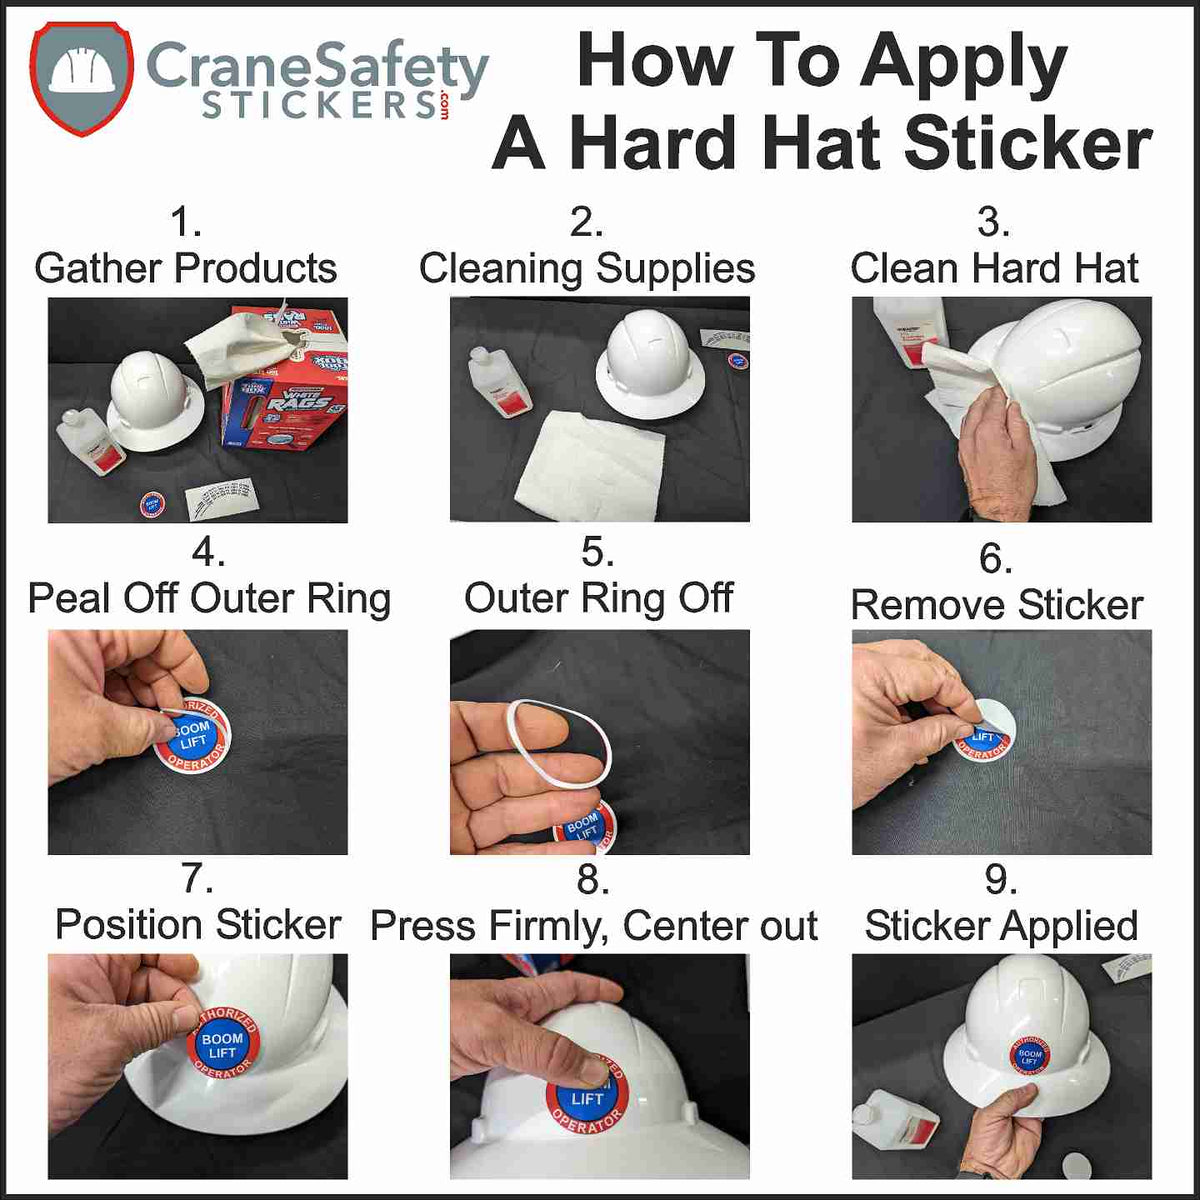 Directions on how to apply a first aide sticker to a hard hat.